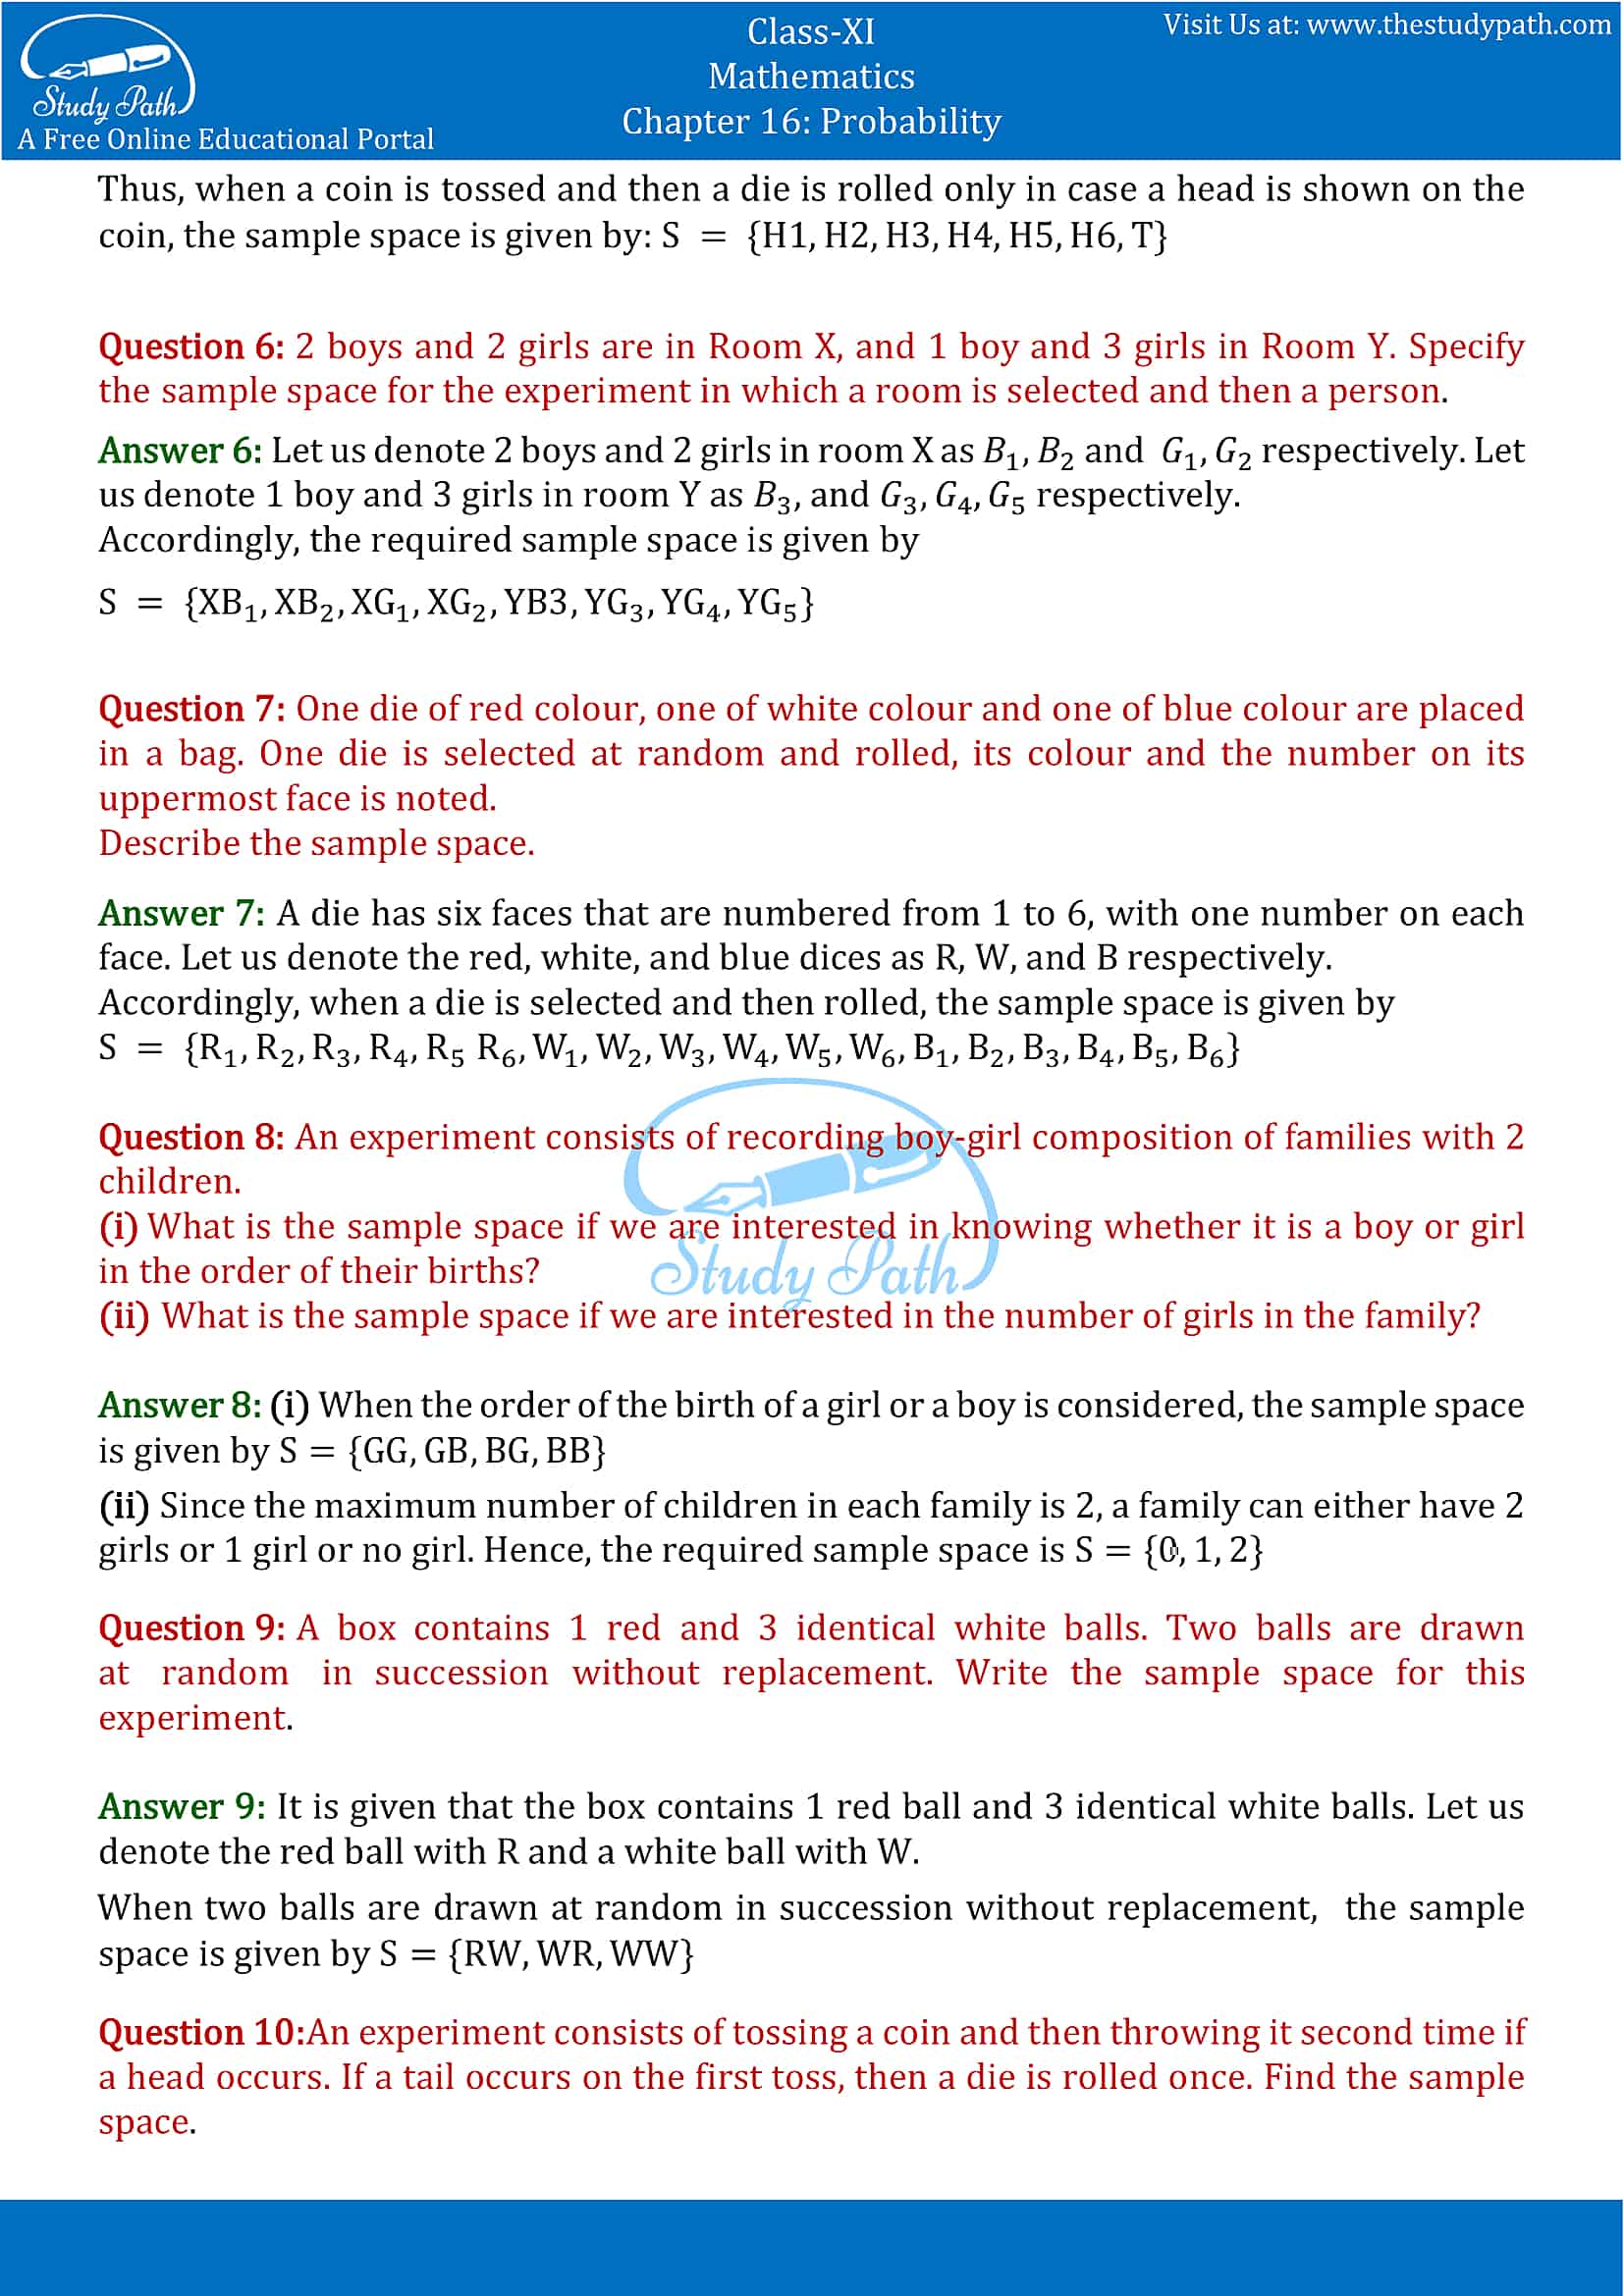 NCERT Solutions for Class 11 Maths chapter 16 Probability part-2